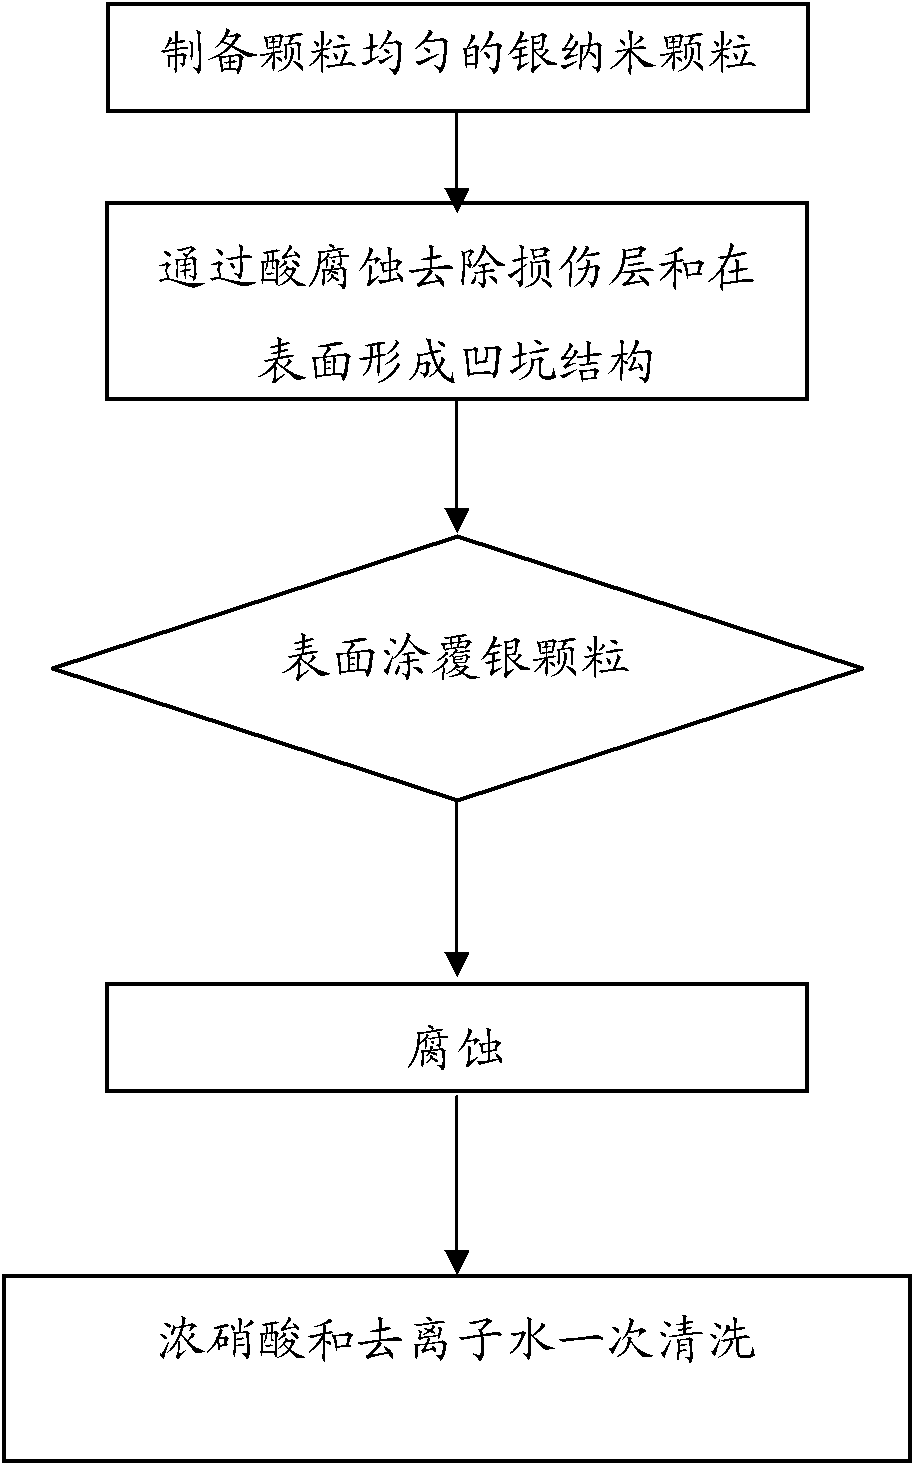 Surface texture method of solar battery silicon slice